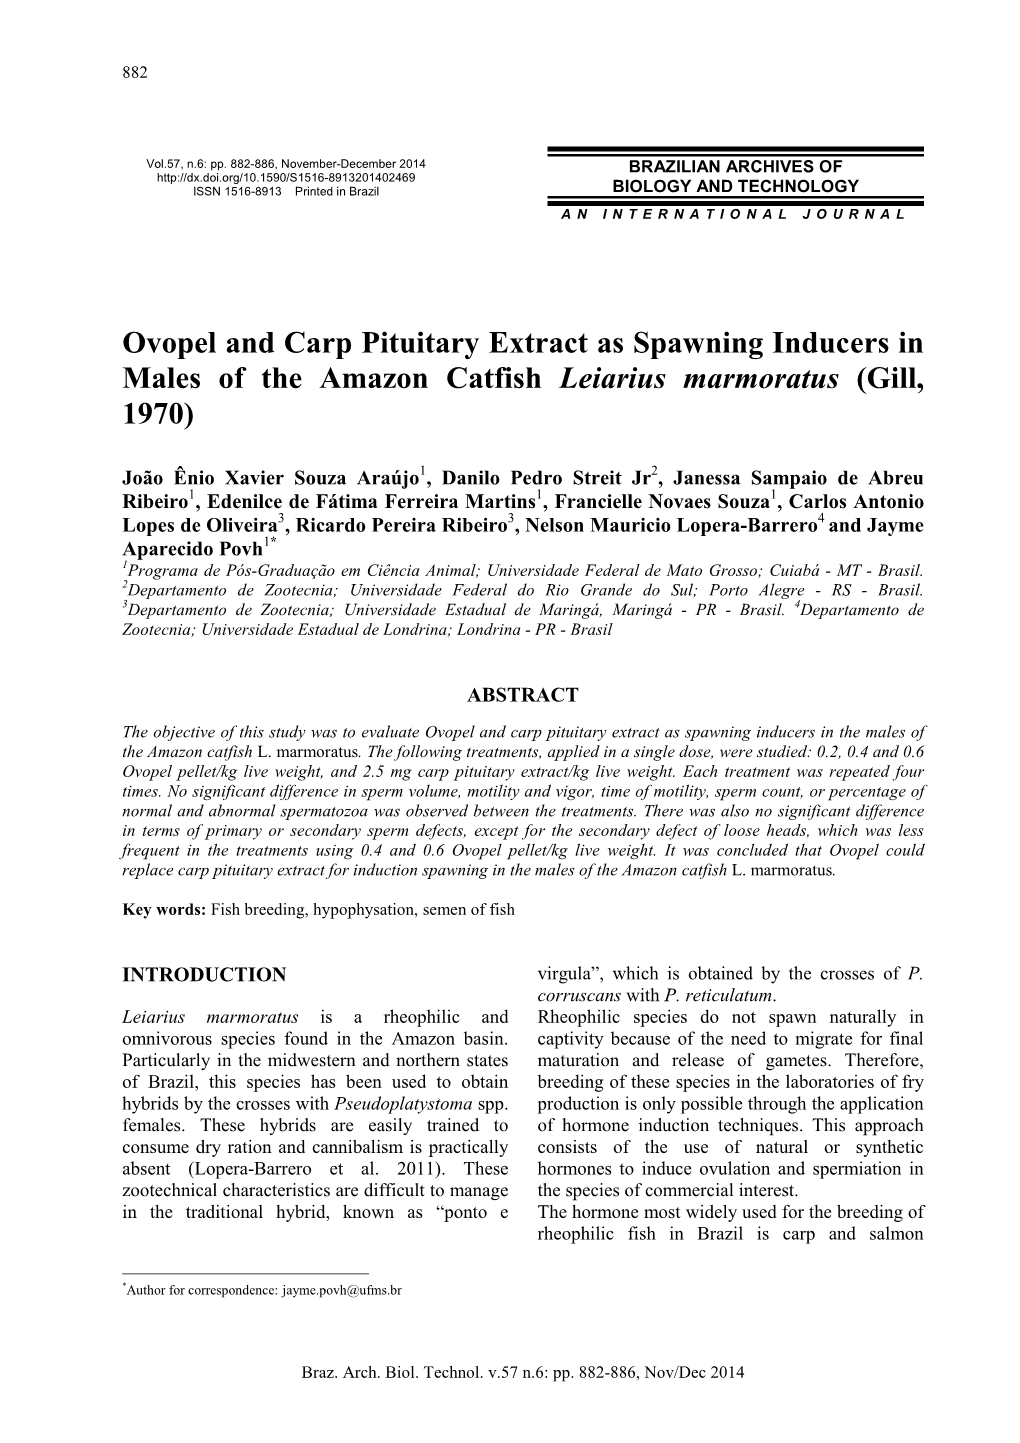 Ovopel and Carp Pituitary Extract As Spawning Inducers in Males of the Amazon Catfish Leiarius Marmoratus (Gill, 1970)